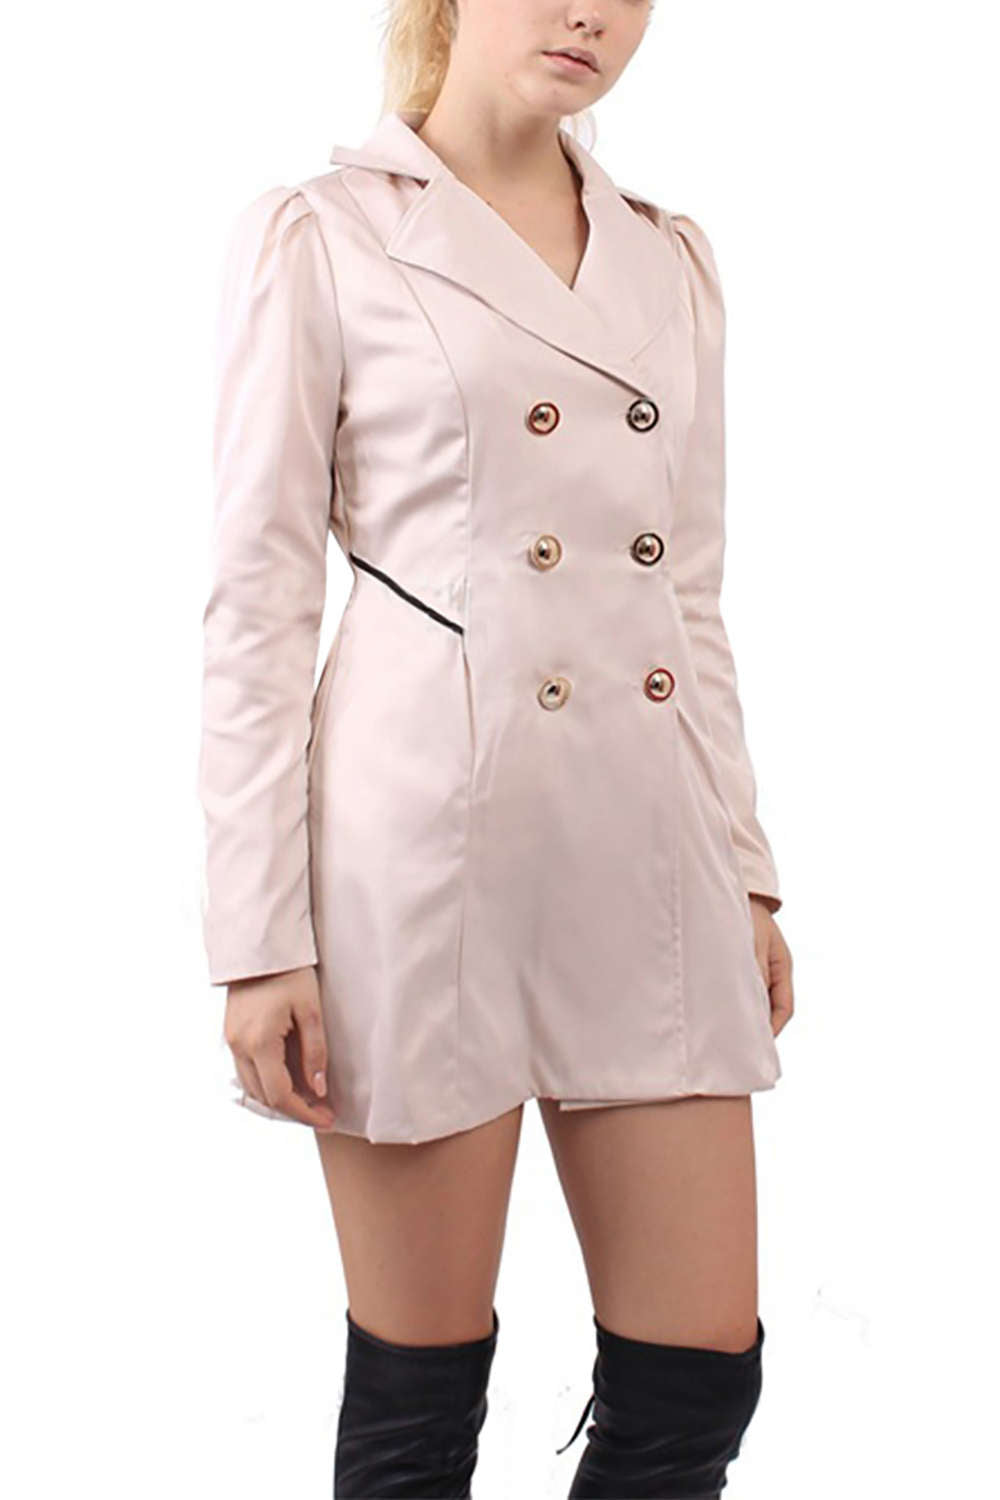 Iyasson Women's Double Breasted Trench Coat